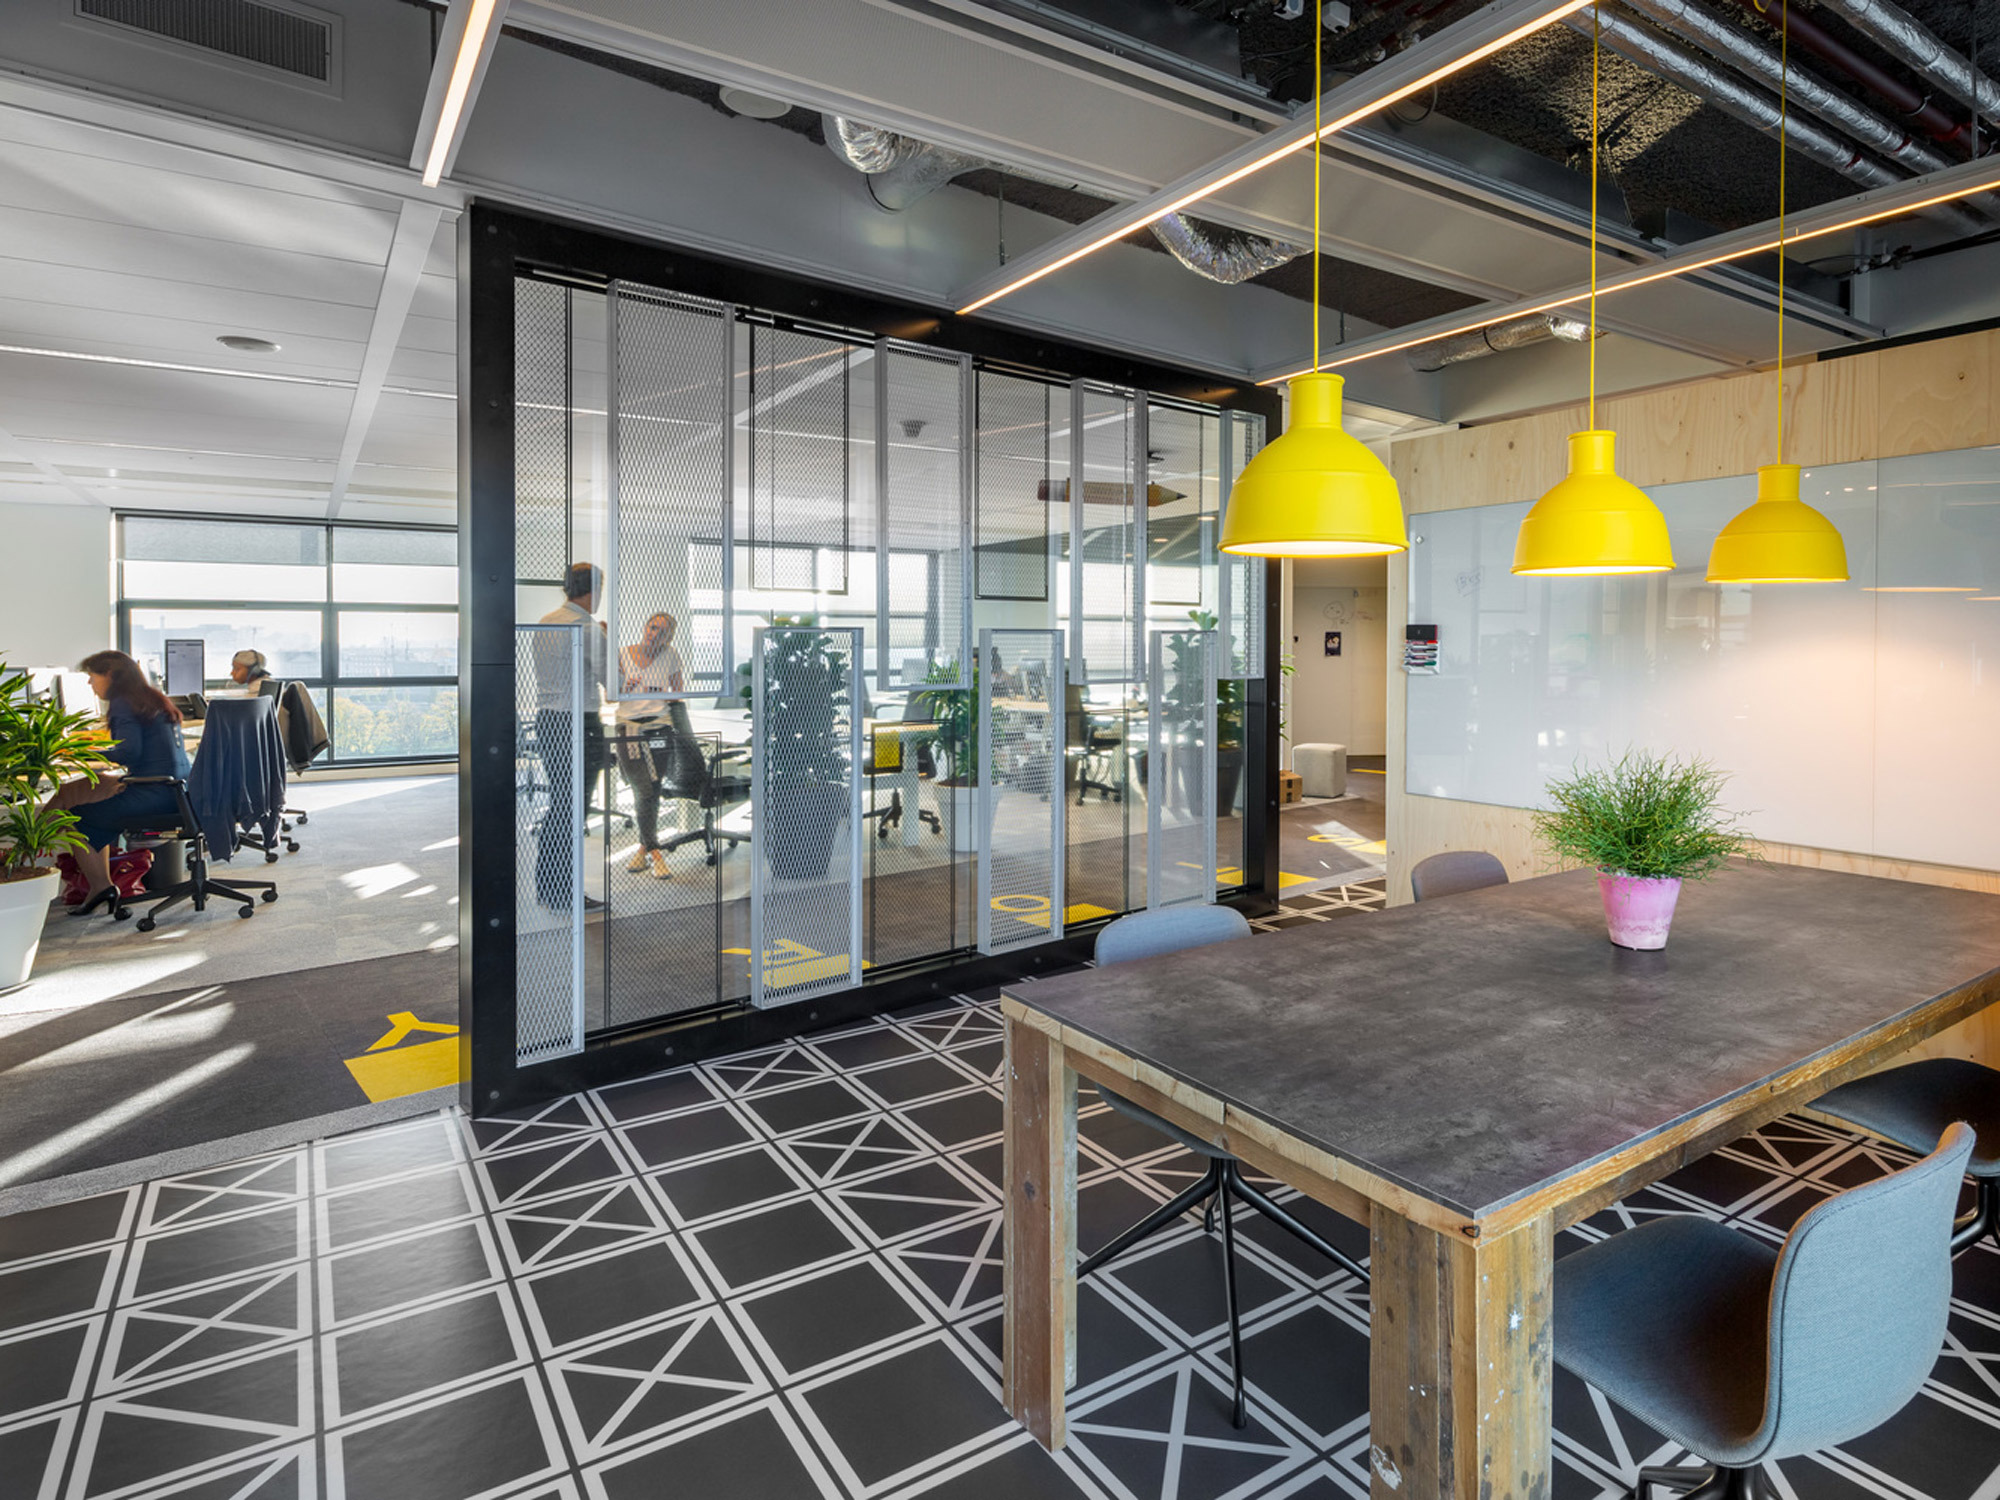 Modern office space with expansive views, featuring a geometric floor pattern, overhead yellow pendant lighting, and a glass divider framing a sleek, communal workspace. Natural light floods the area, enhancing the open-concept design and the collaborative environment punctuated by pops of greenery.